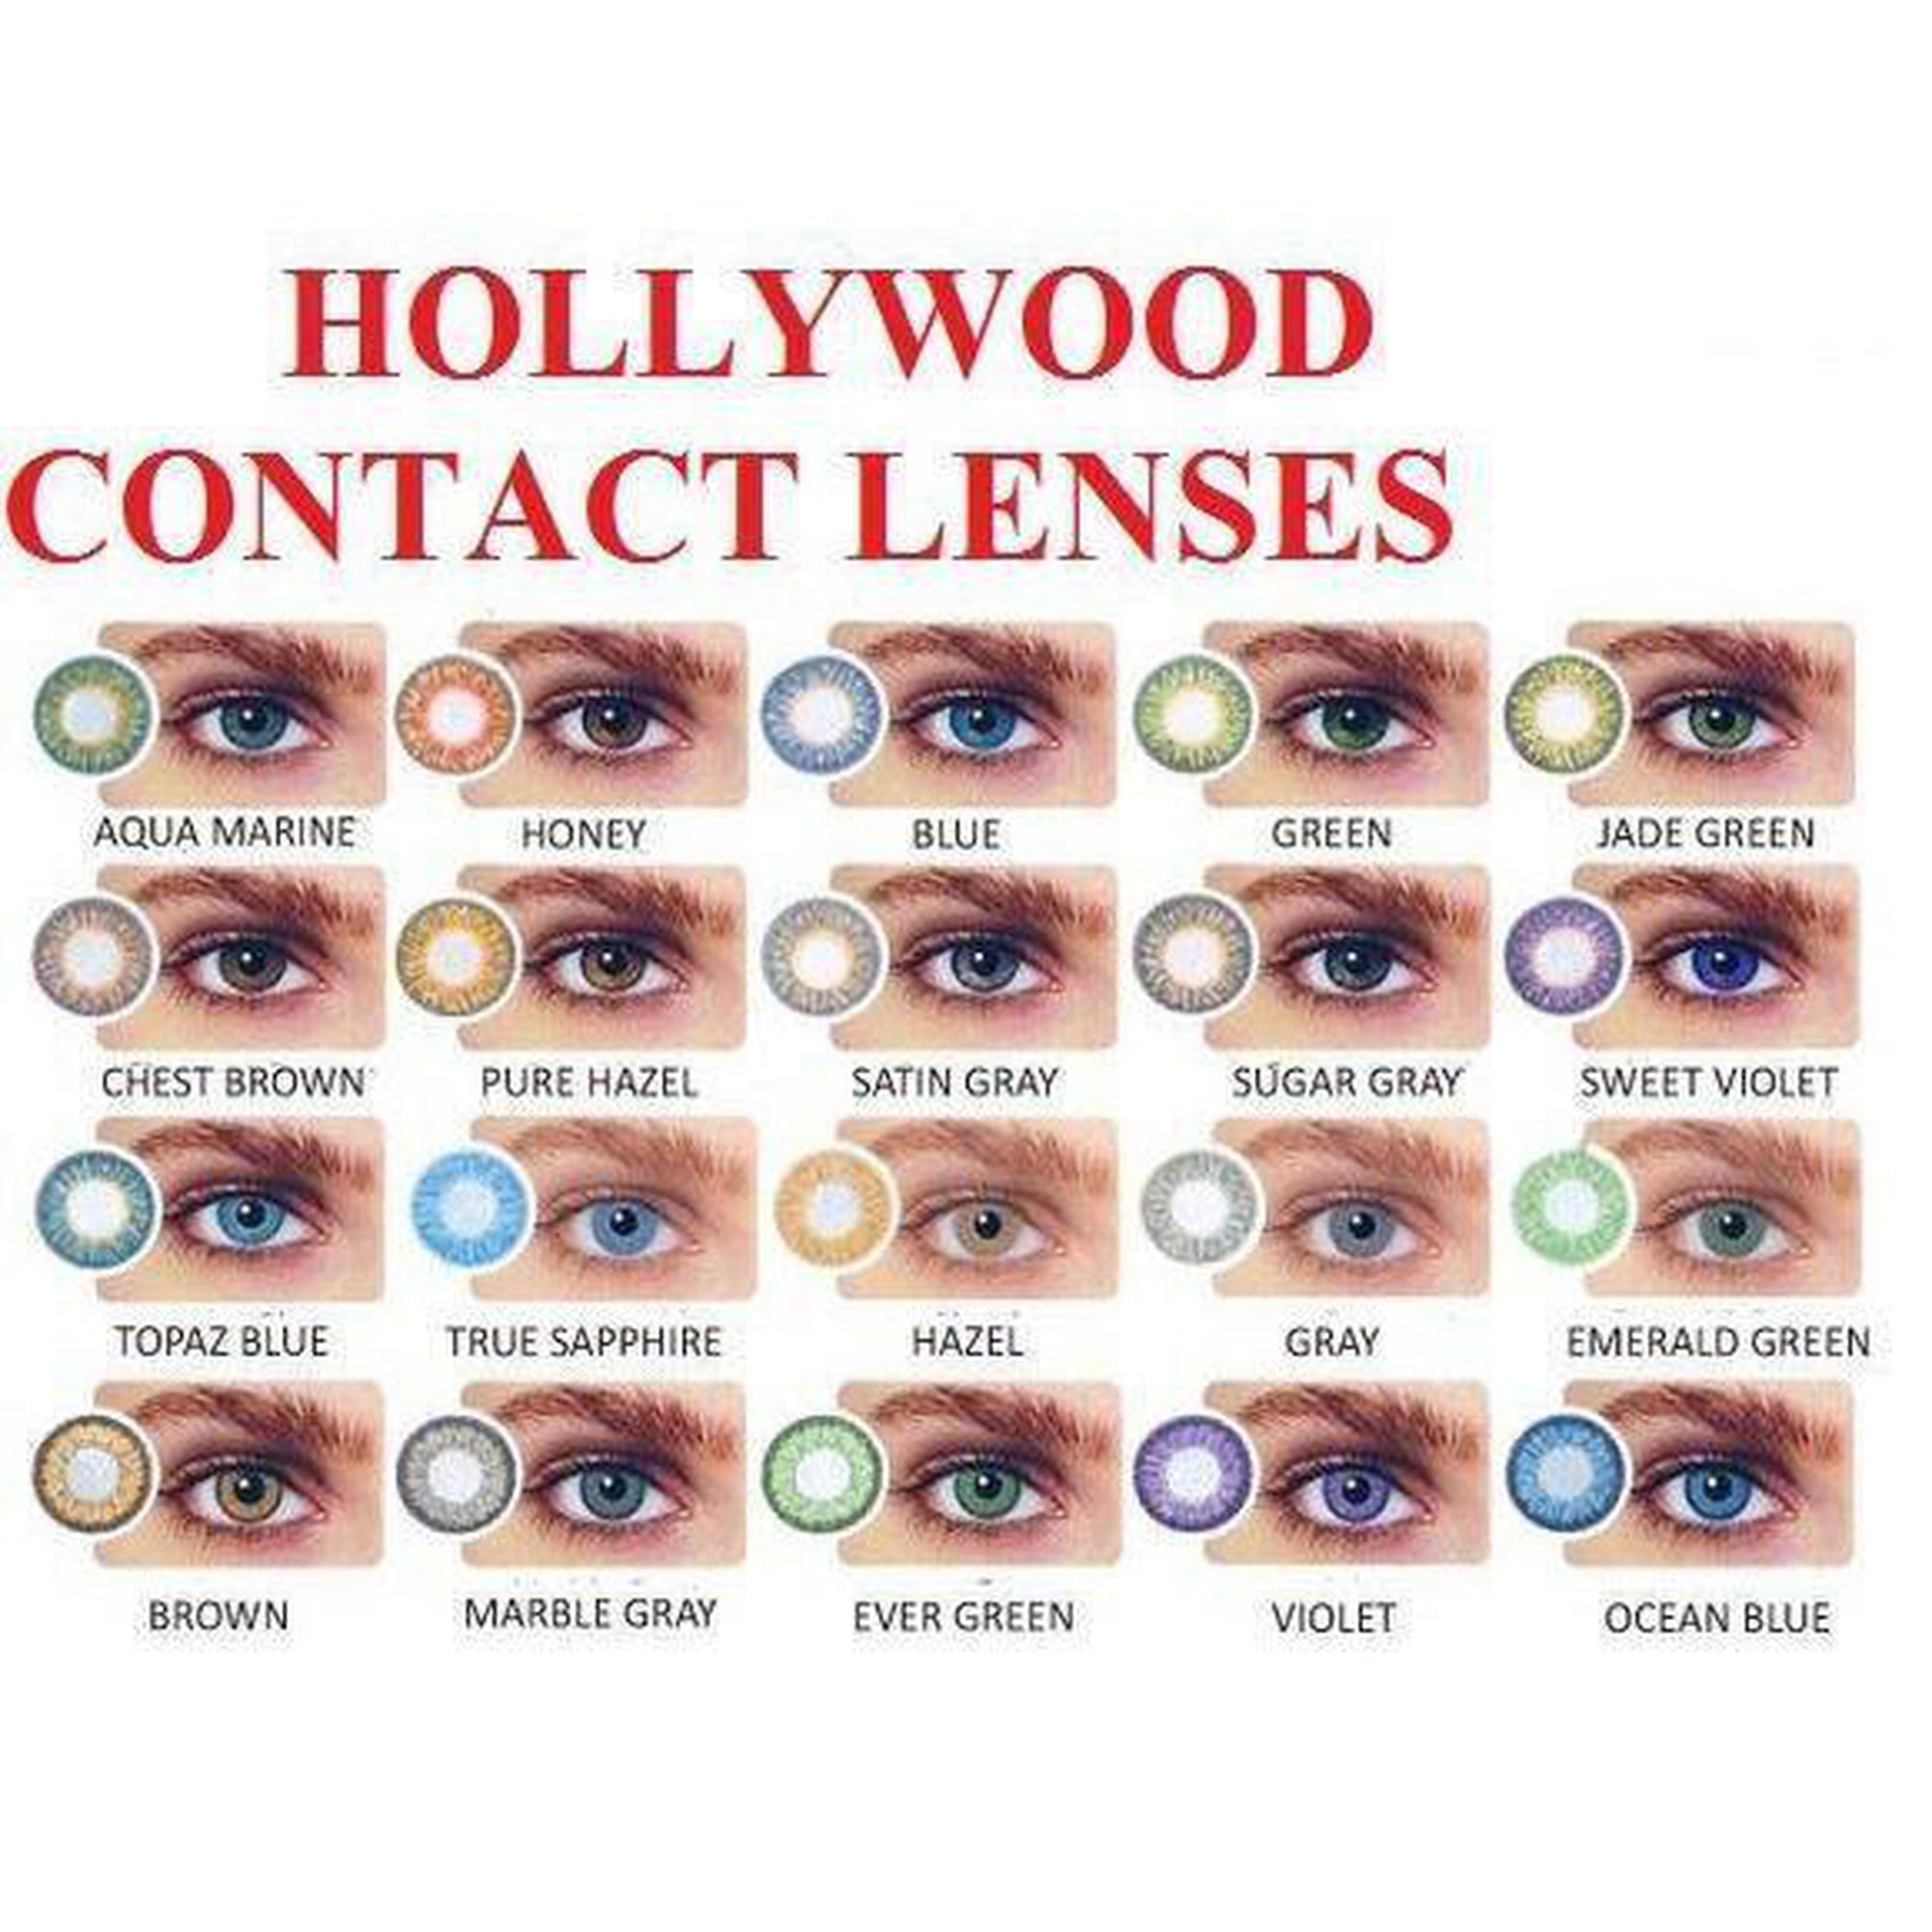 It's Real Hollywood Blossom Contacts